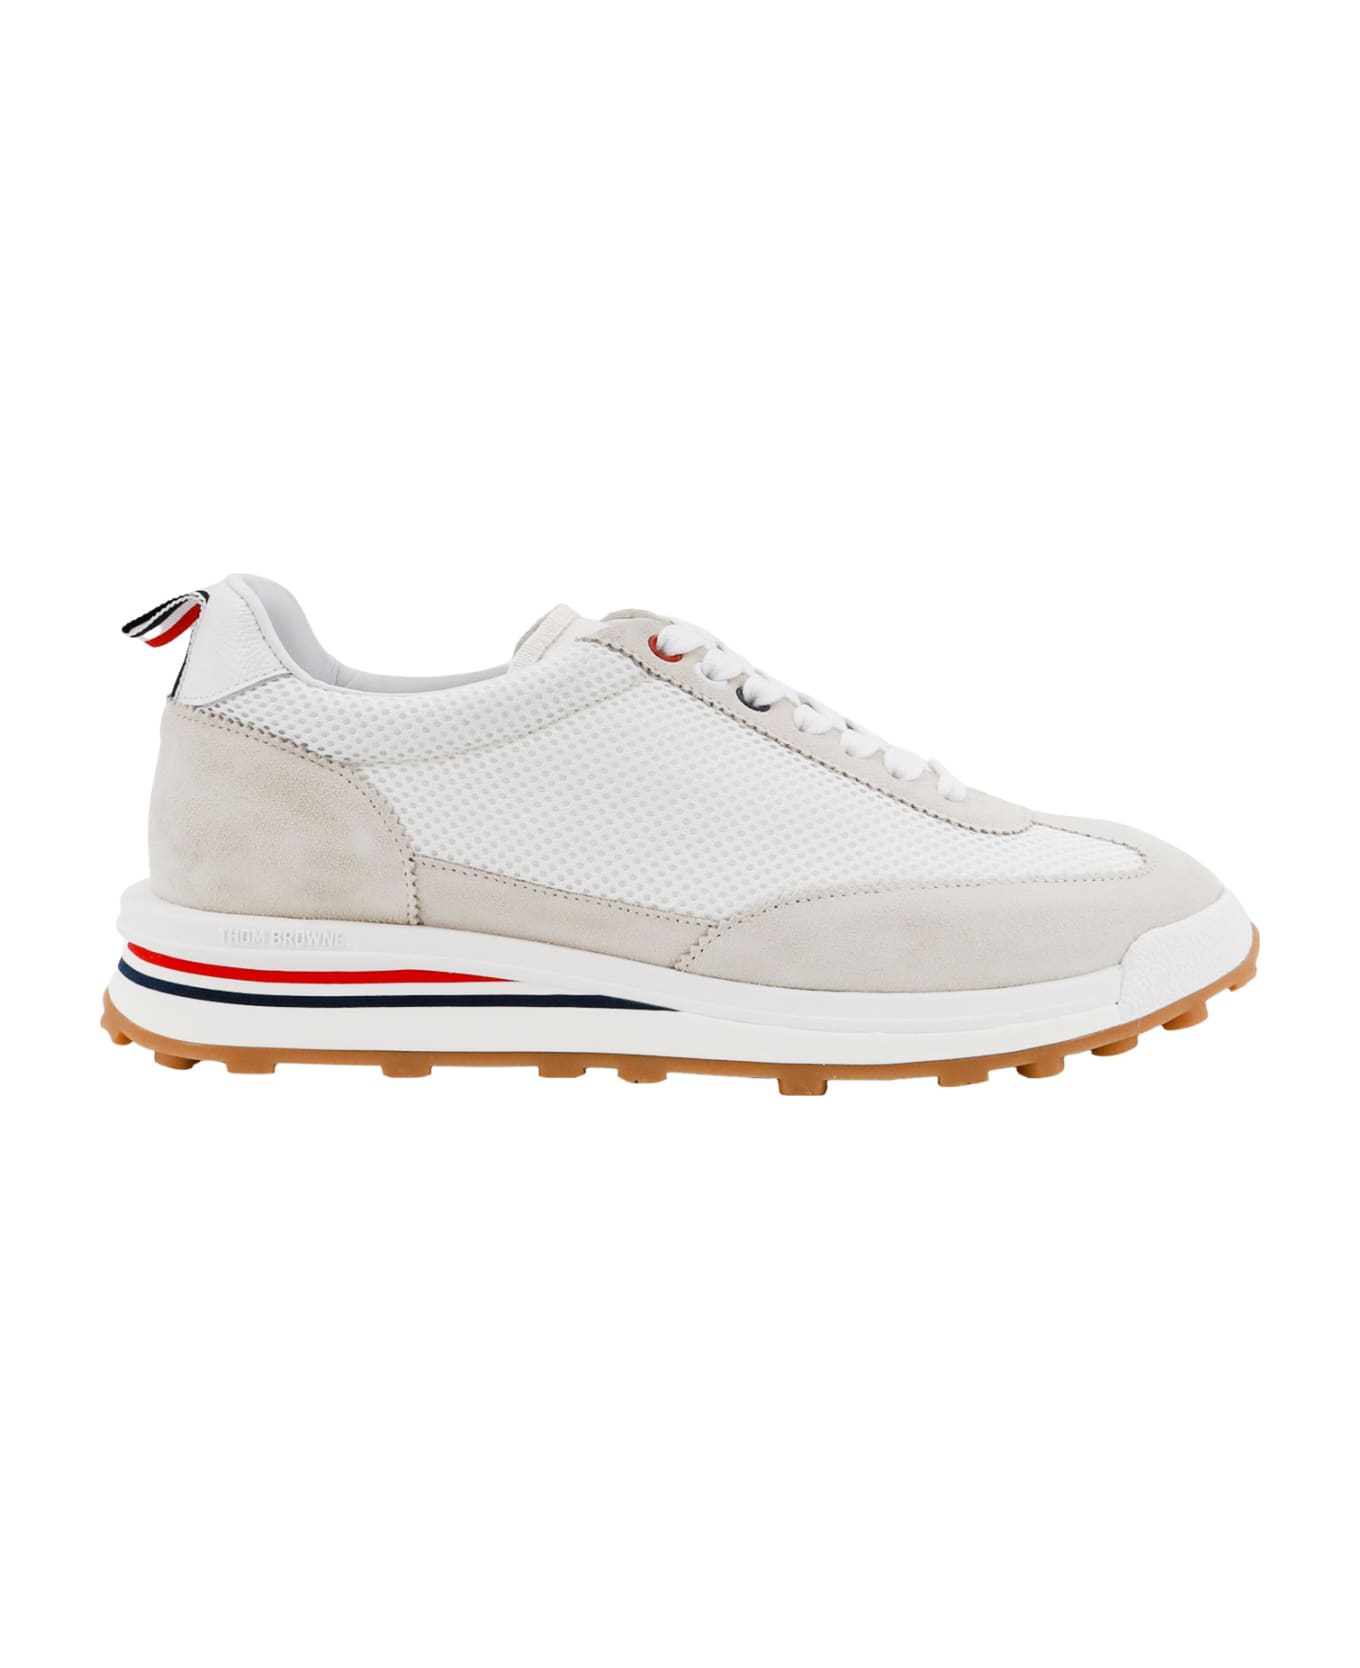 Thom Browne "tech Runner" Sneakers - White